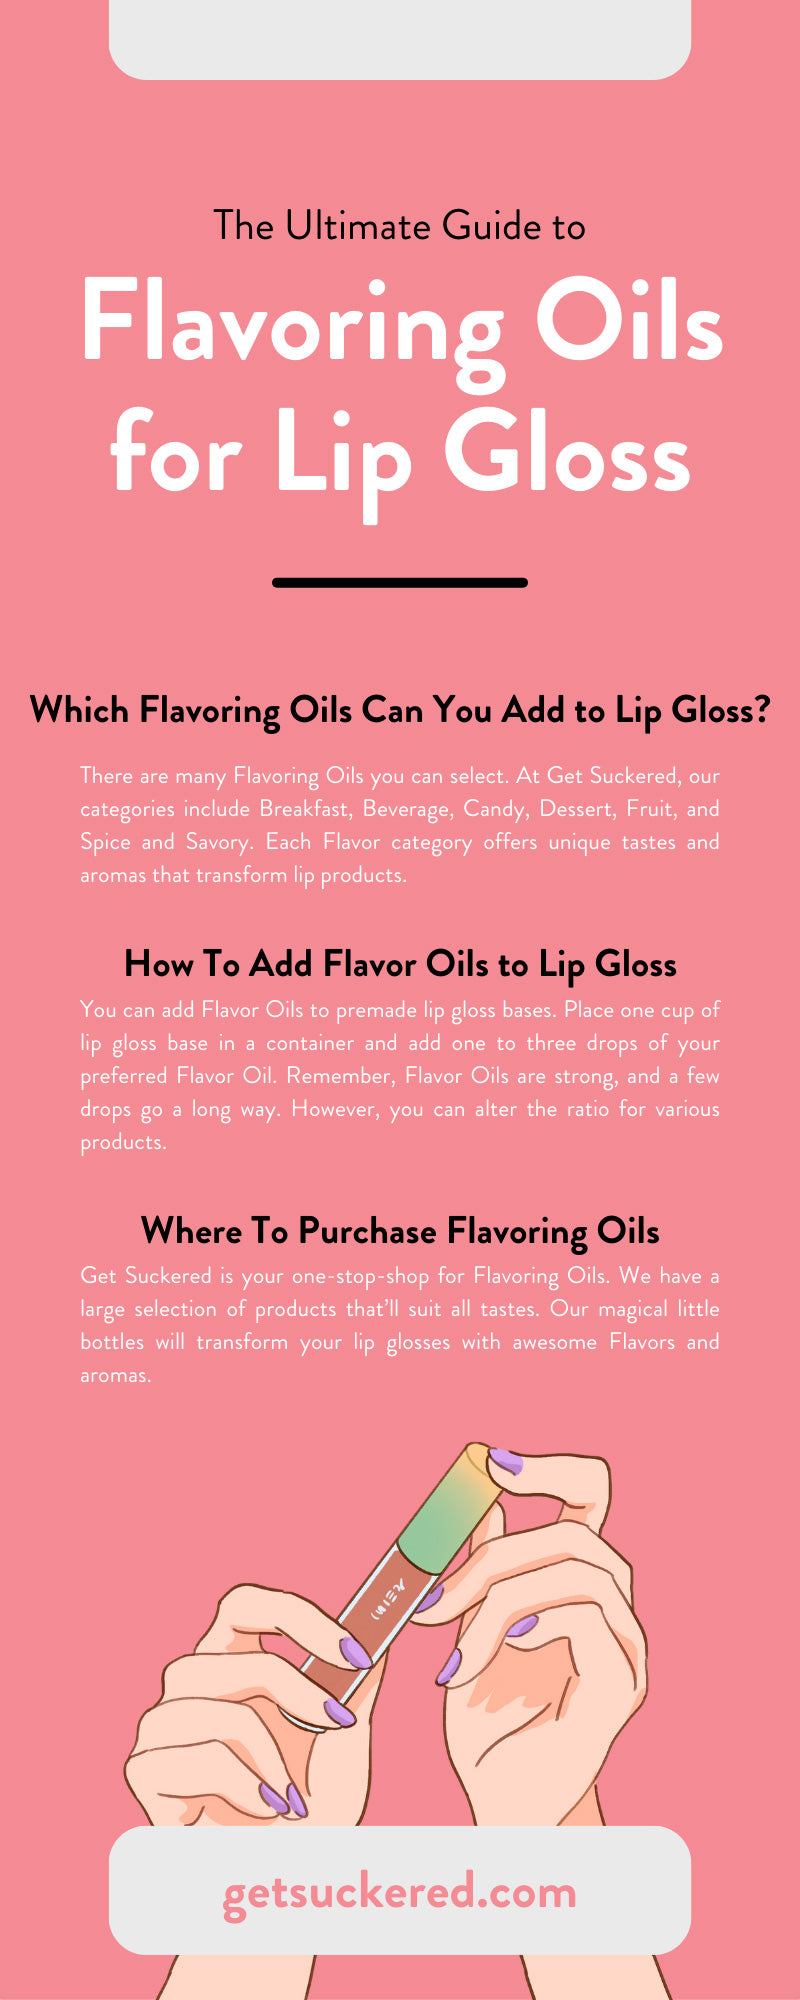 The Ultimate Guide to Flavoring Oils for Lip Gloss